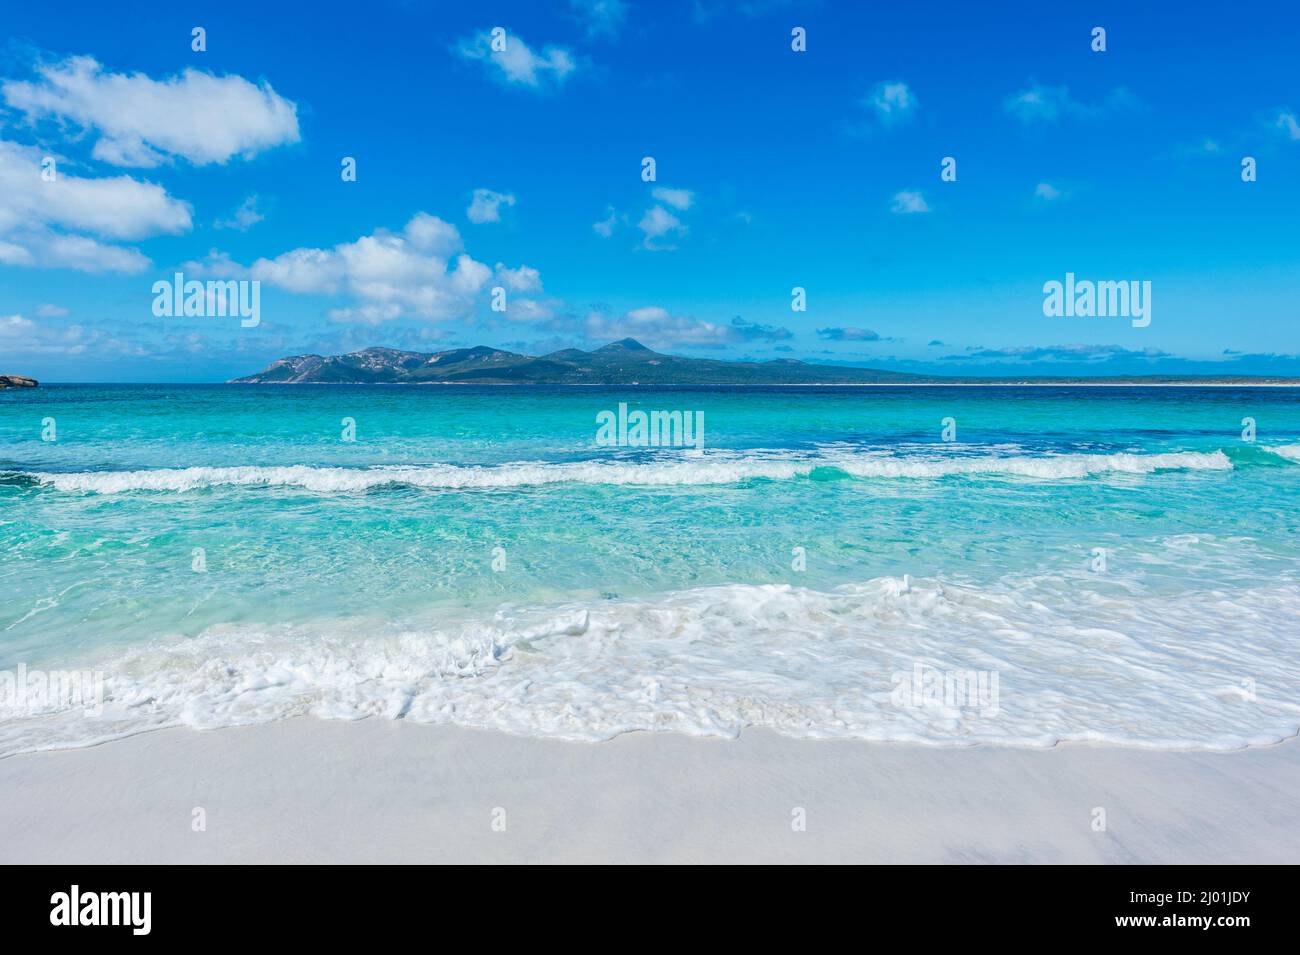 Scenic view of turquoise waters and small waves lapping at East Beach, Manypeaks, near Albany, Western Australia, WA, Australia Stock Photo